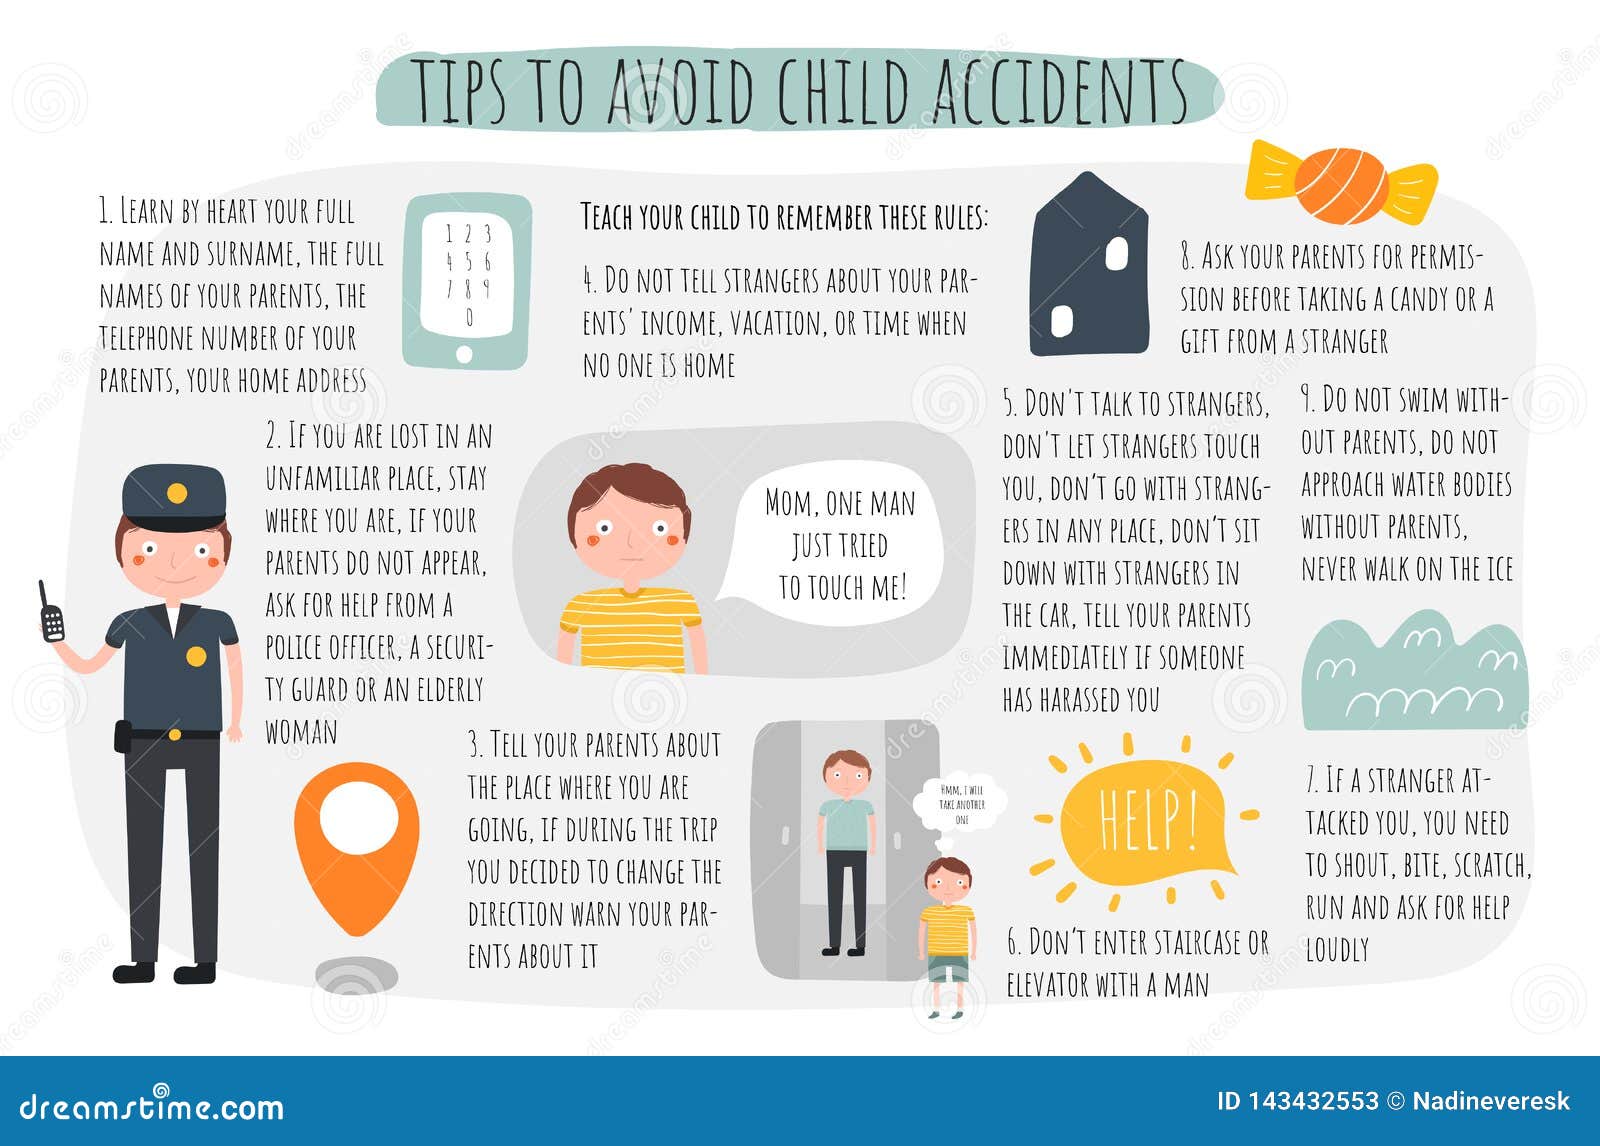 tips to avoid child accidents infographic. recommendations for parents about child safeness.